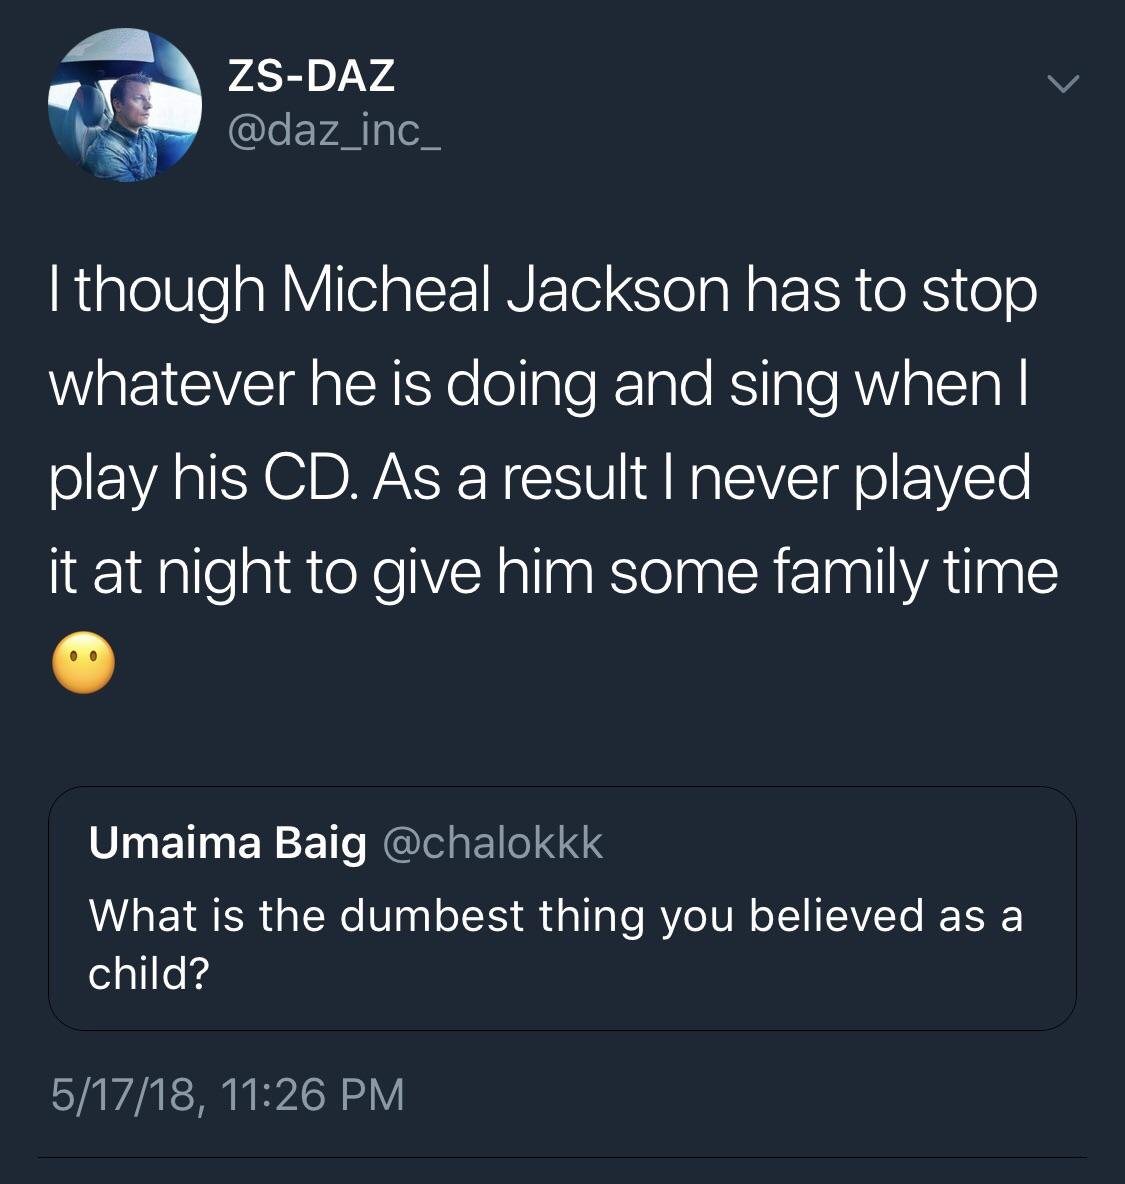 atmosphere - ZsDaz I though Micheal Jackson has to stop whatever he is doing and sing when || play his Cd. As a result I never played it at night to give him some family time Umaima Baig What is the dumbest thing you believed as a child? 51718,